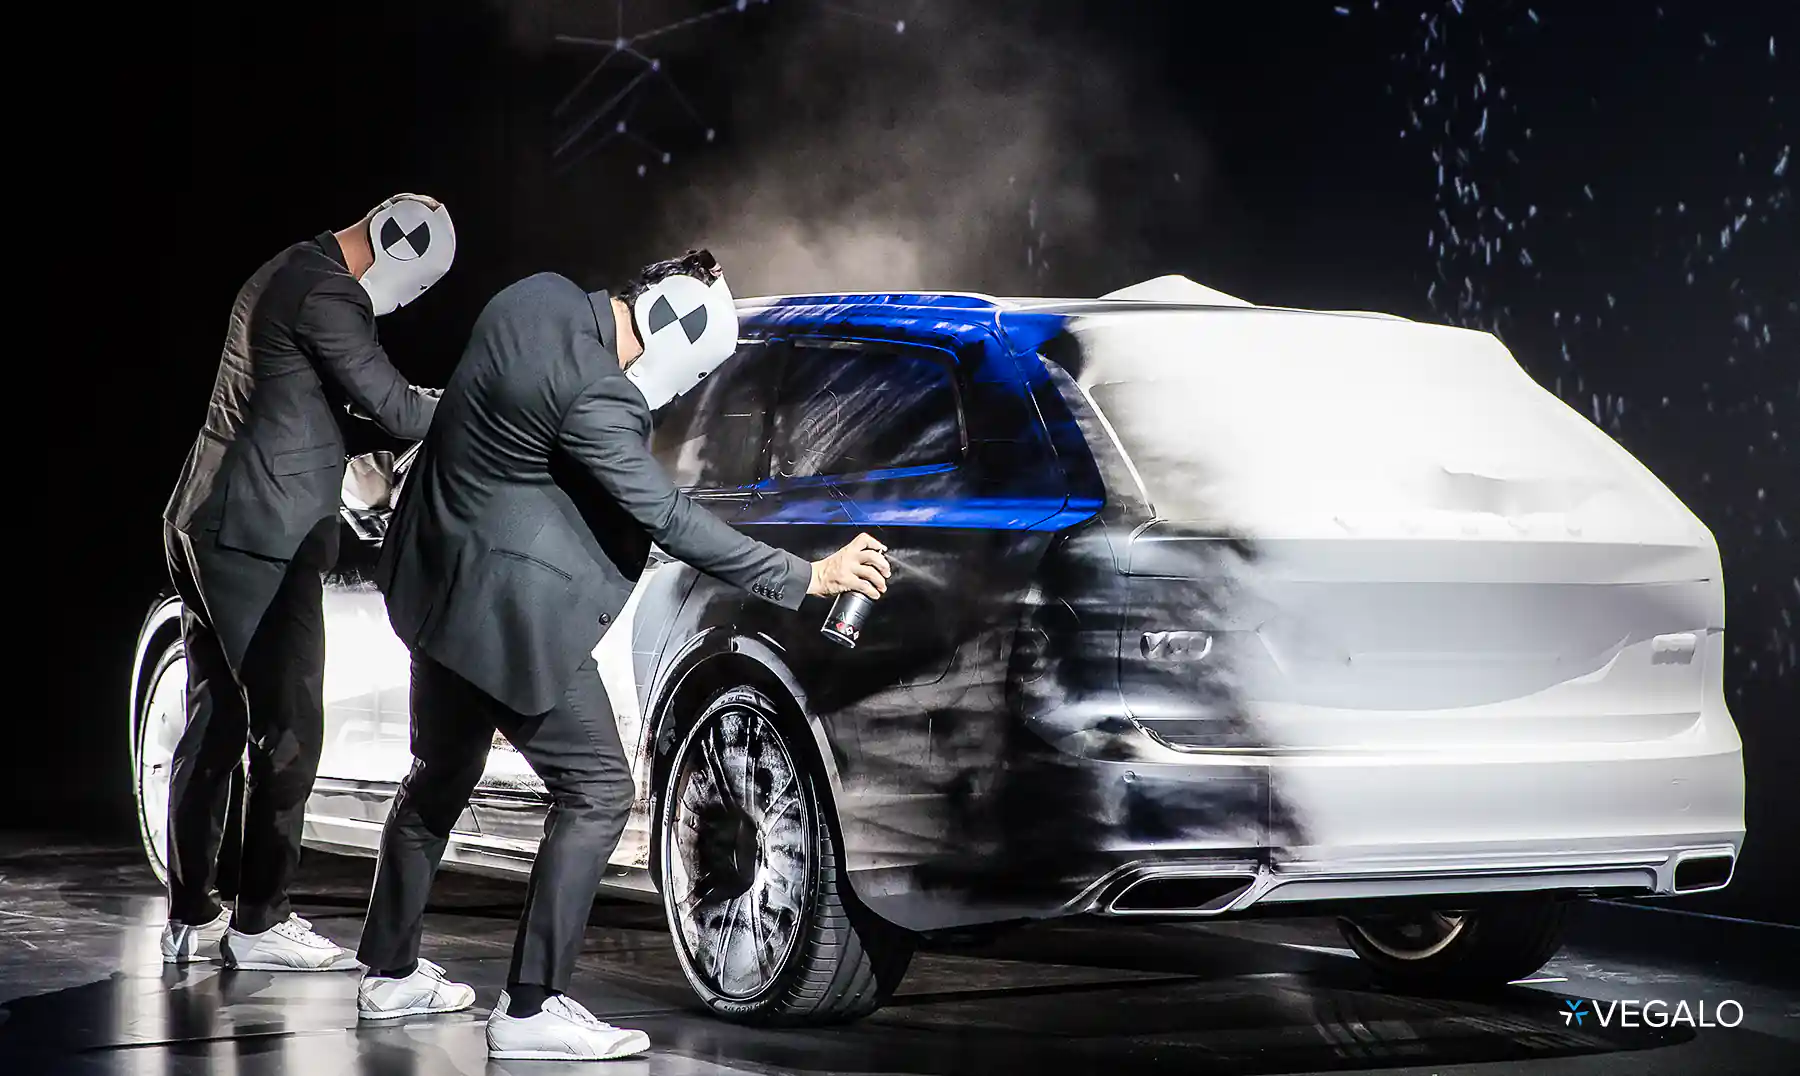 event photo of two men on stage, dressed in costume and spray painting a car during a corporate event